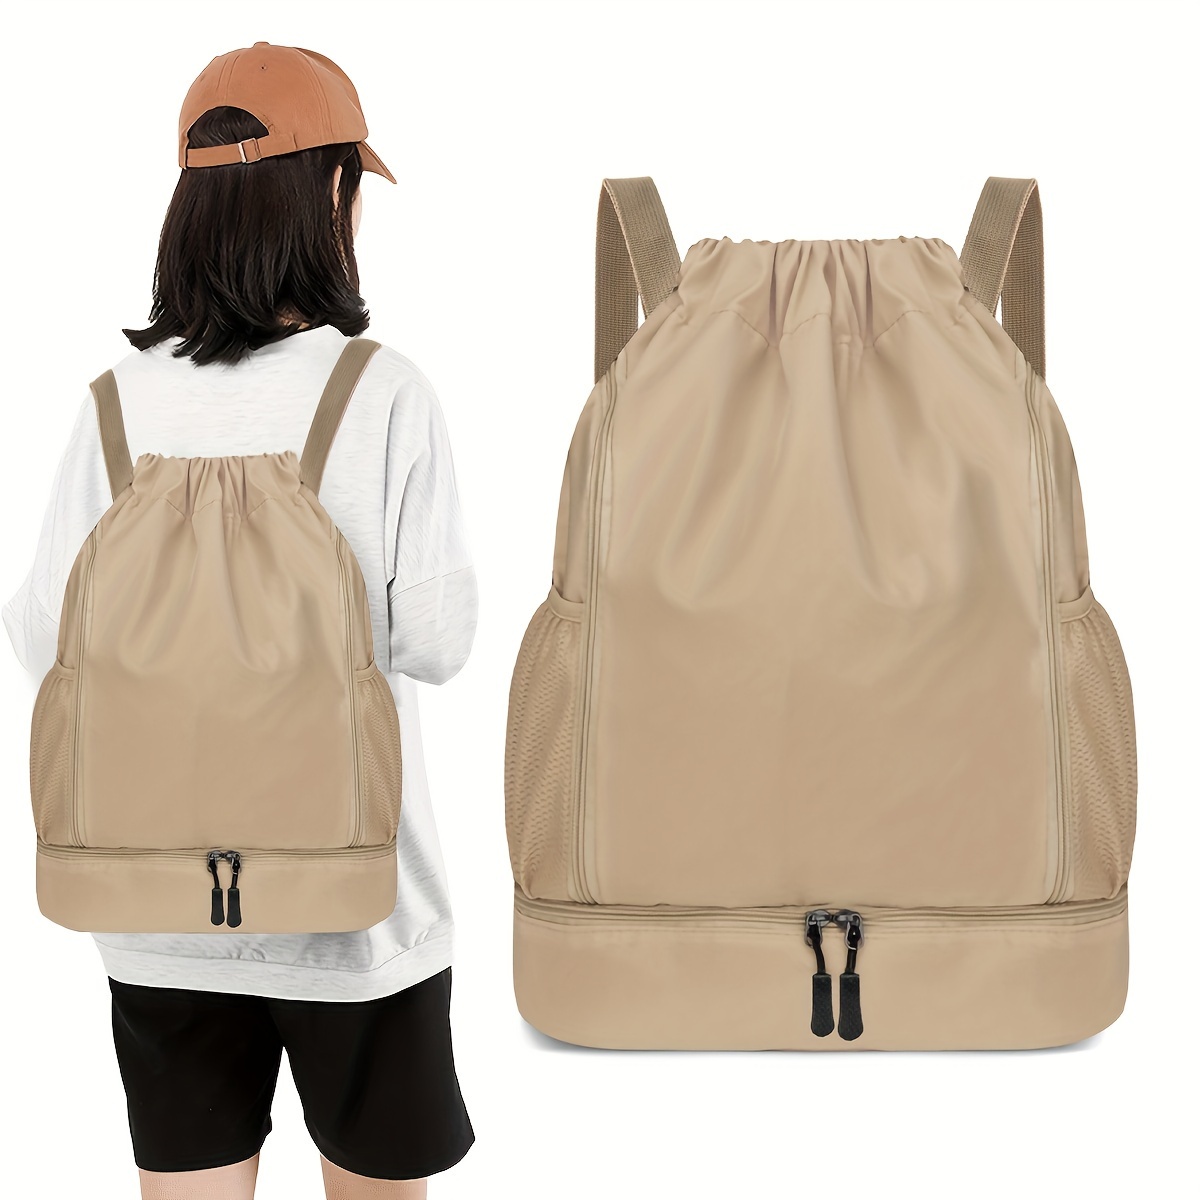 

Lightweight Nylon Drawstring Backpack, Unisex Casual Sports Rucksack With Side Pockets, Outdoor Hiking And Gym Bag